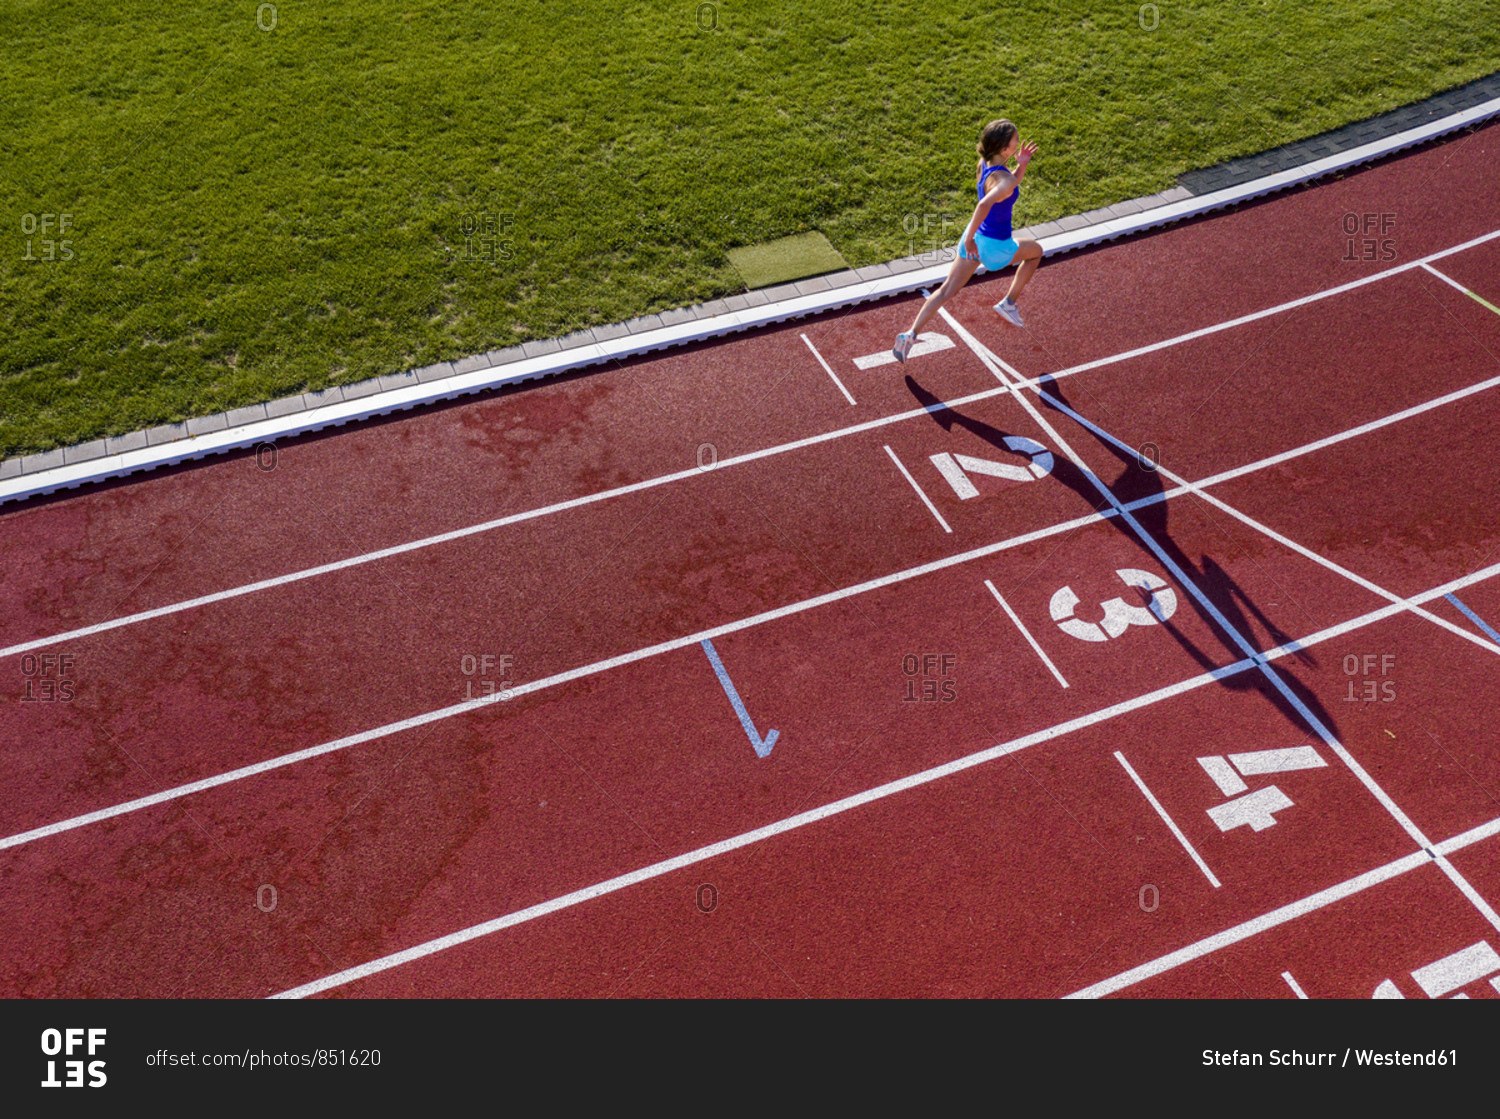 Aerial view of a running young female athlete on a tartan track crossing finishing line